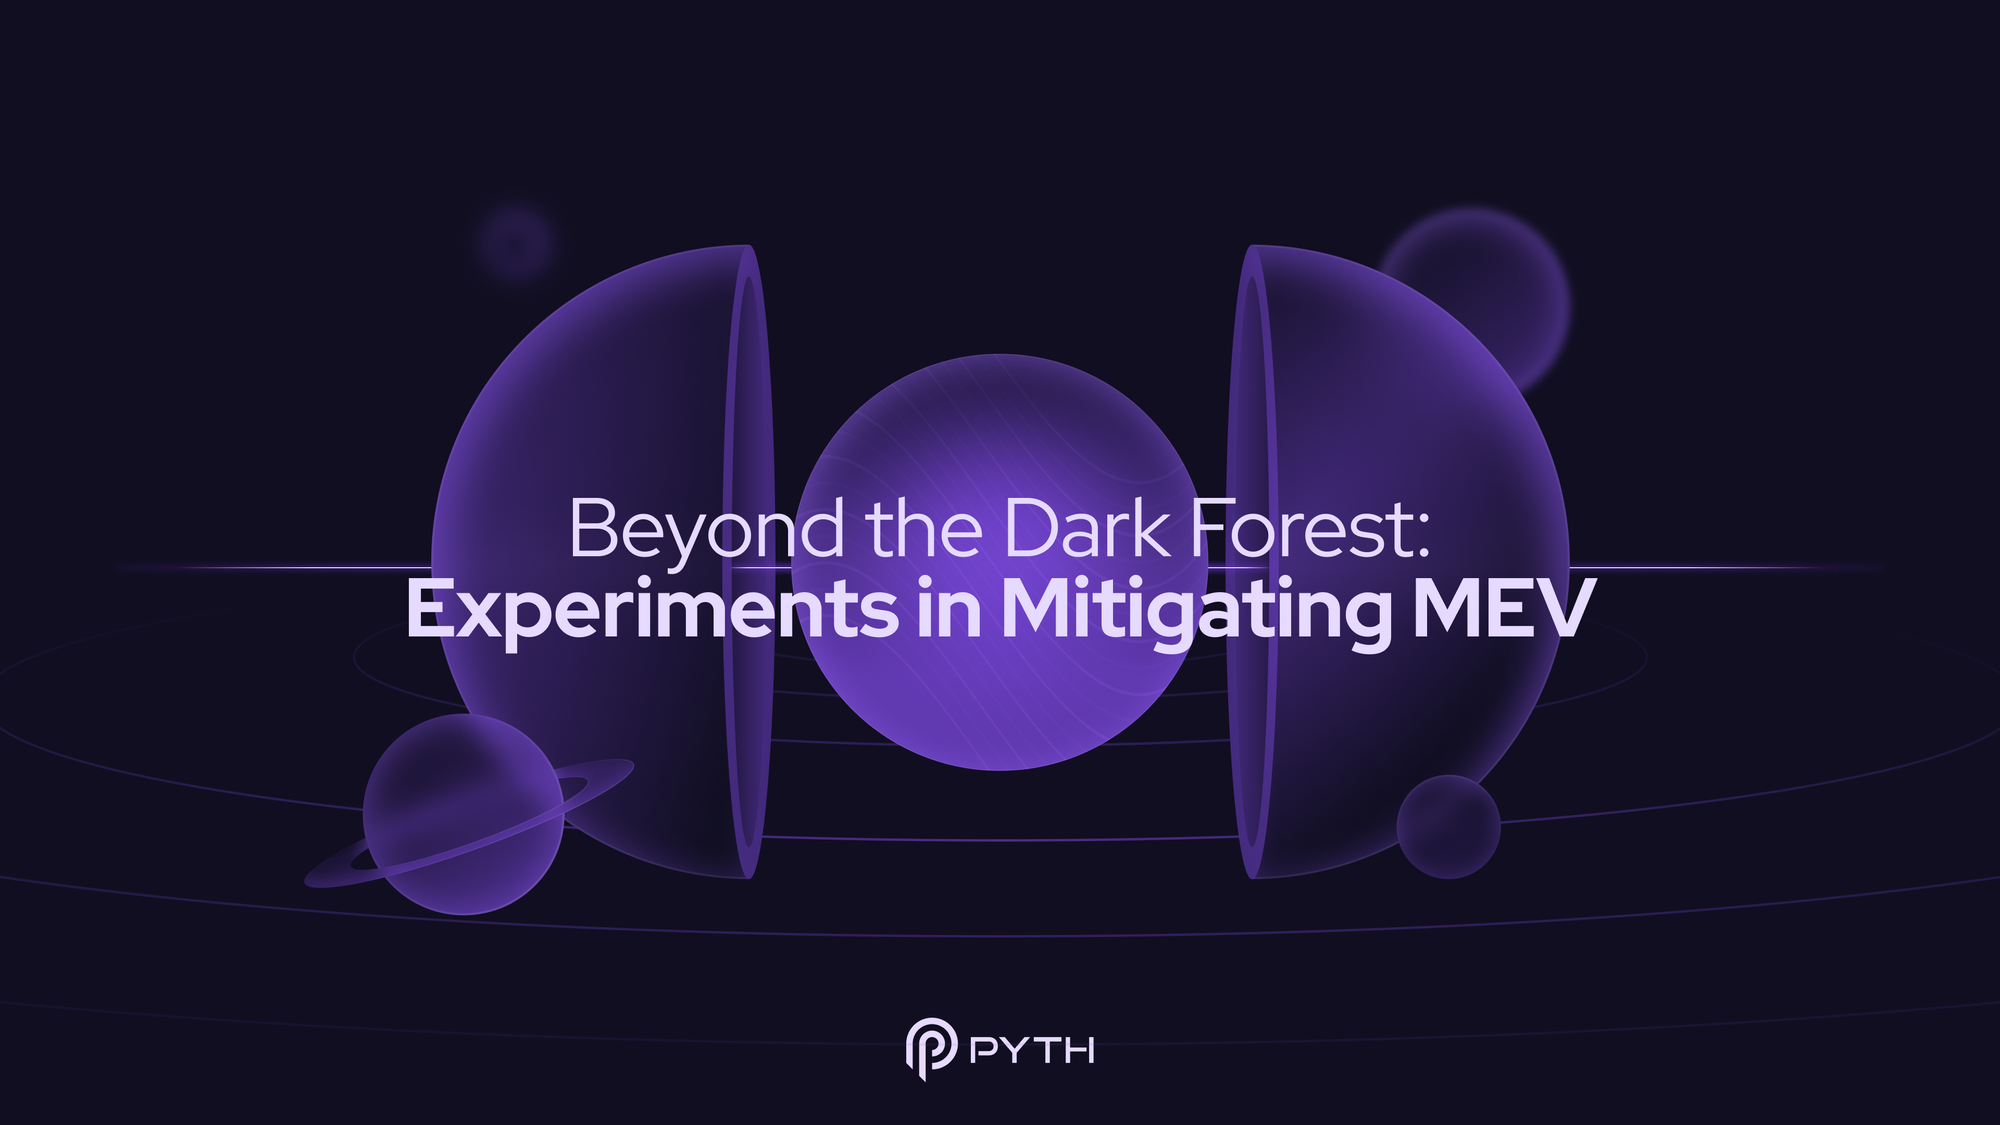 Beyond the Dark Forest: Experiments in Mitigating MEV